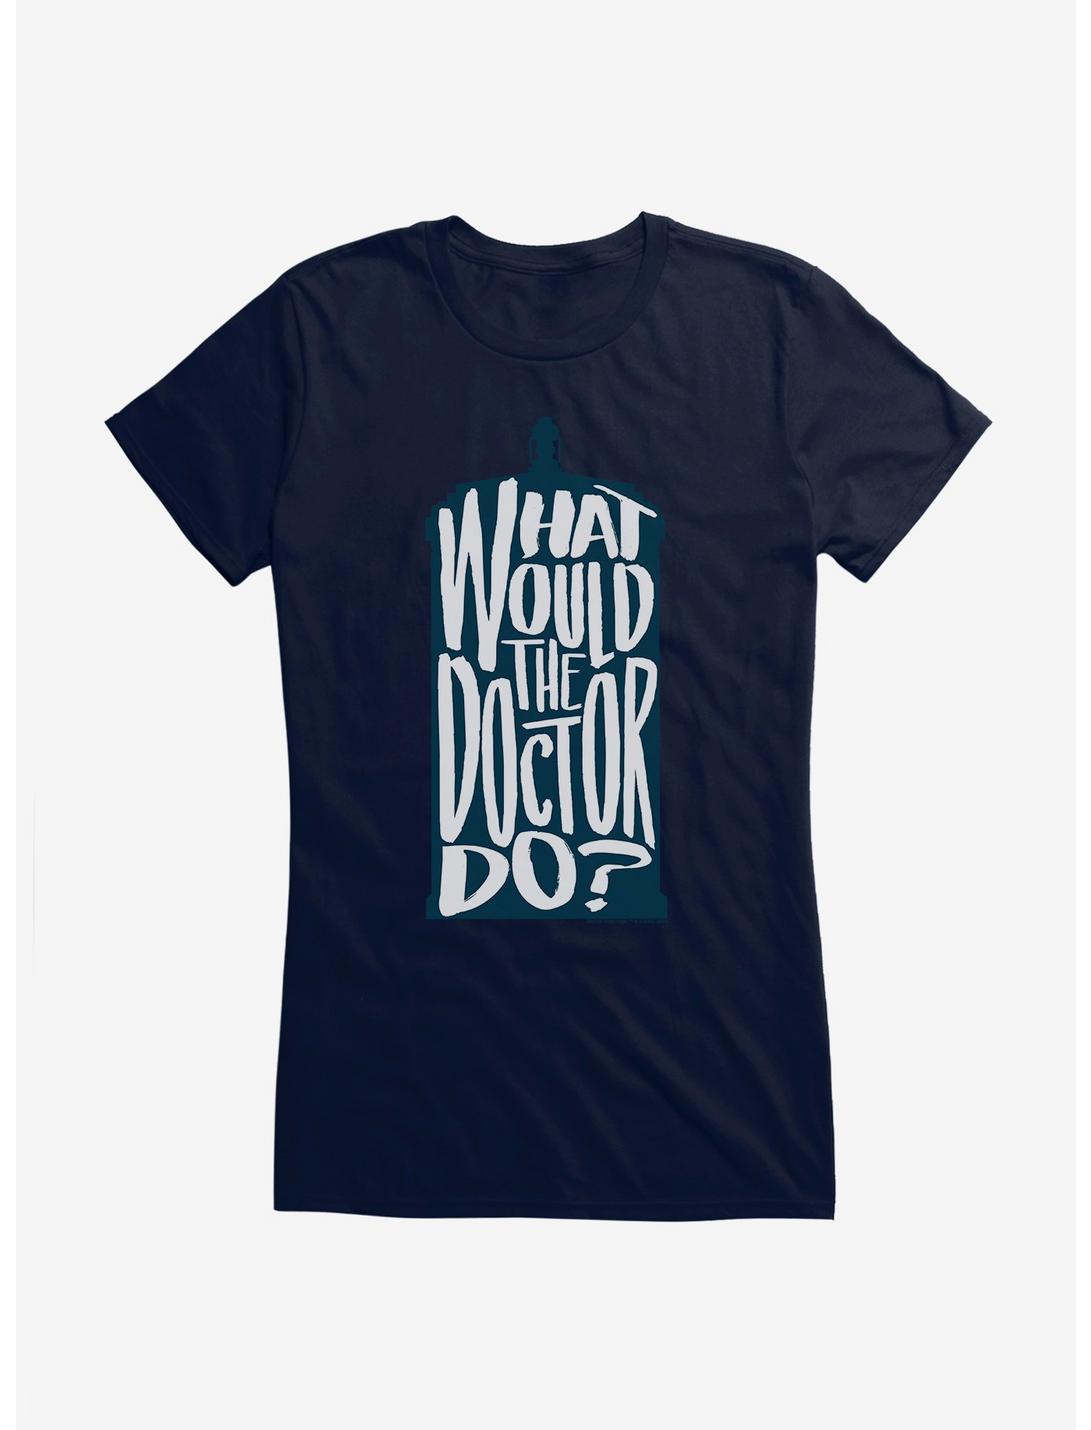 Plus Size Doctor Who What Would The Doctor Do Girls T-Shirt, , hi-res